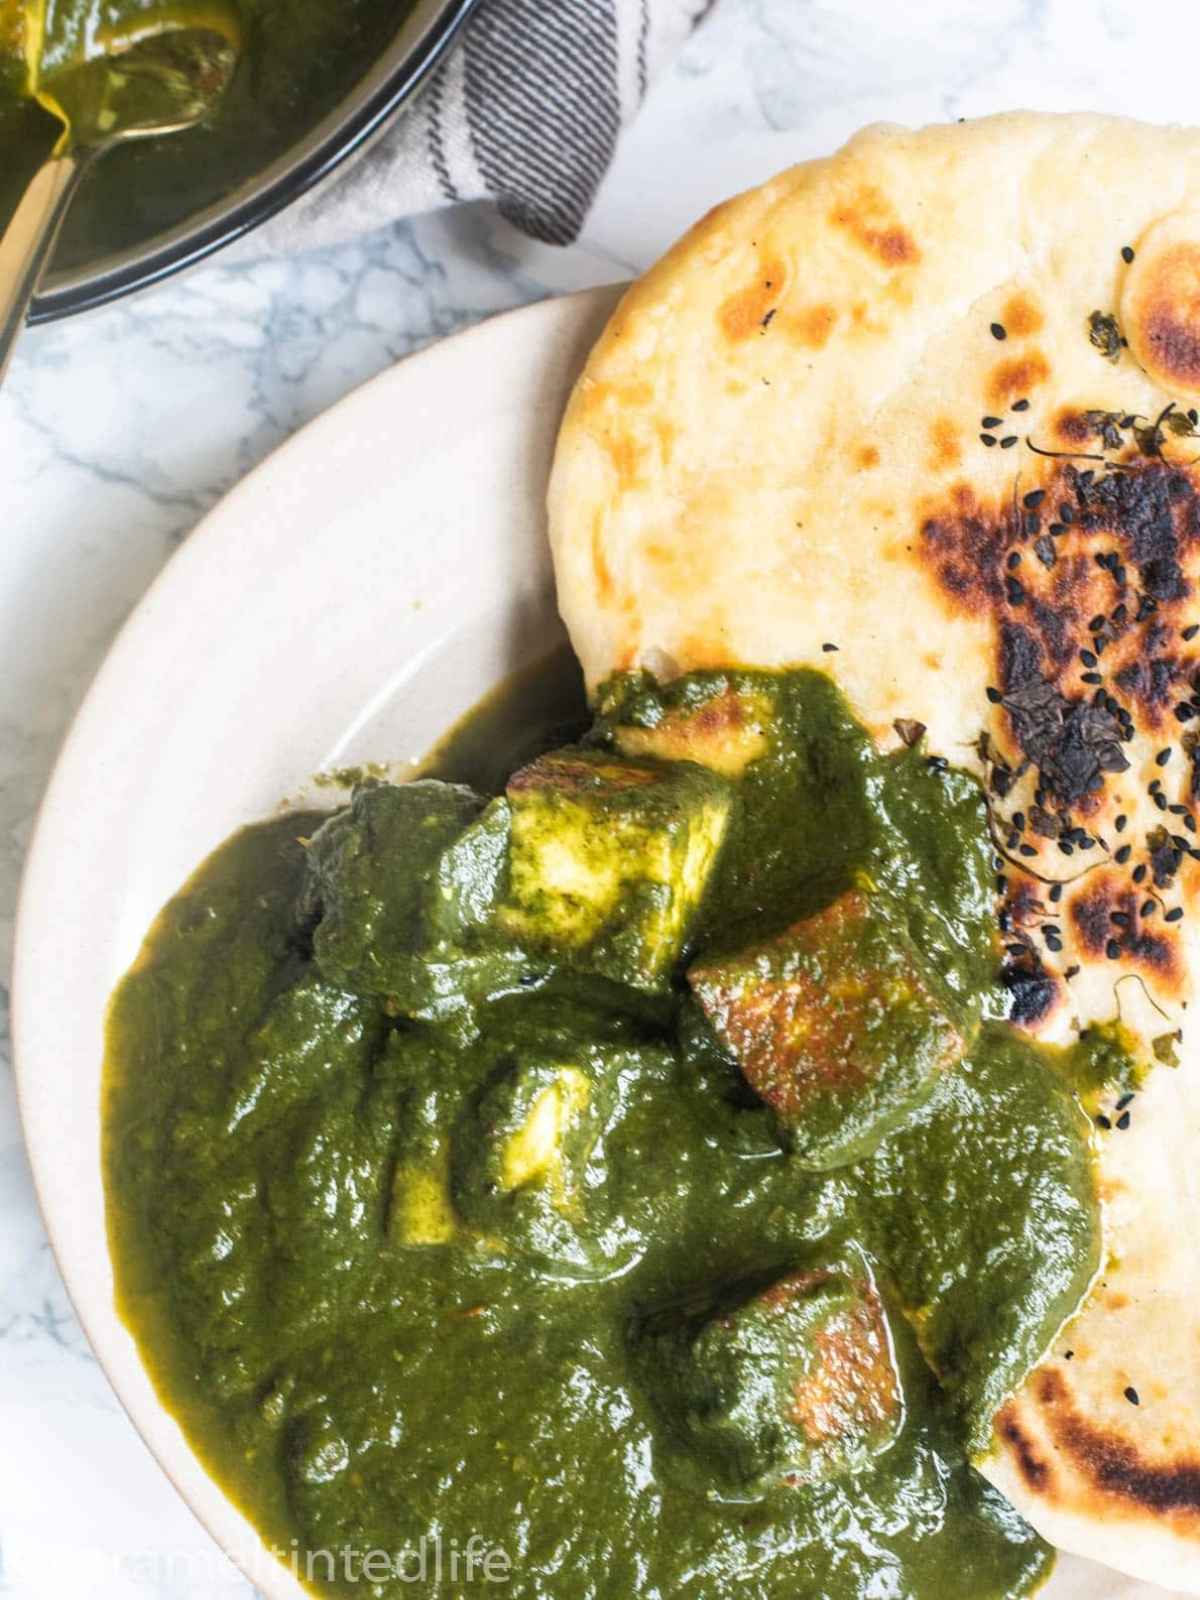 Saag paneer on a plate served with naan